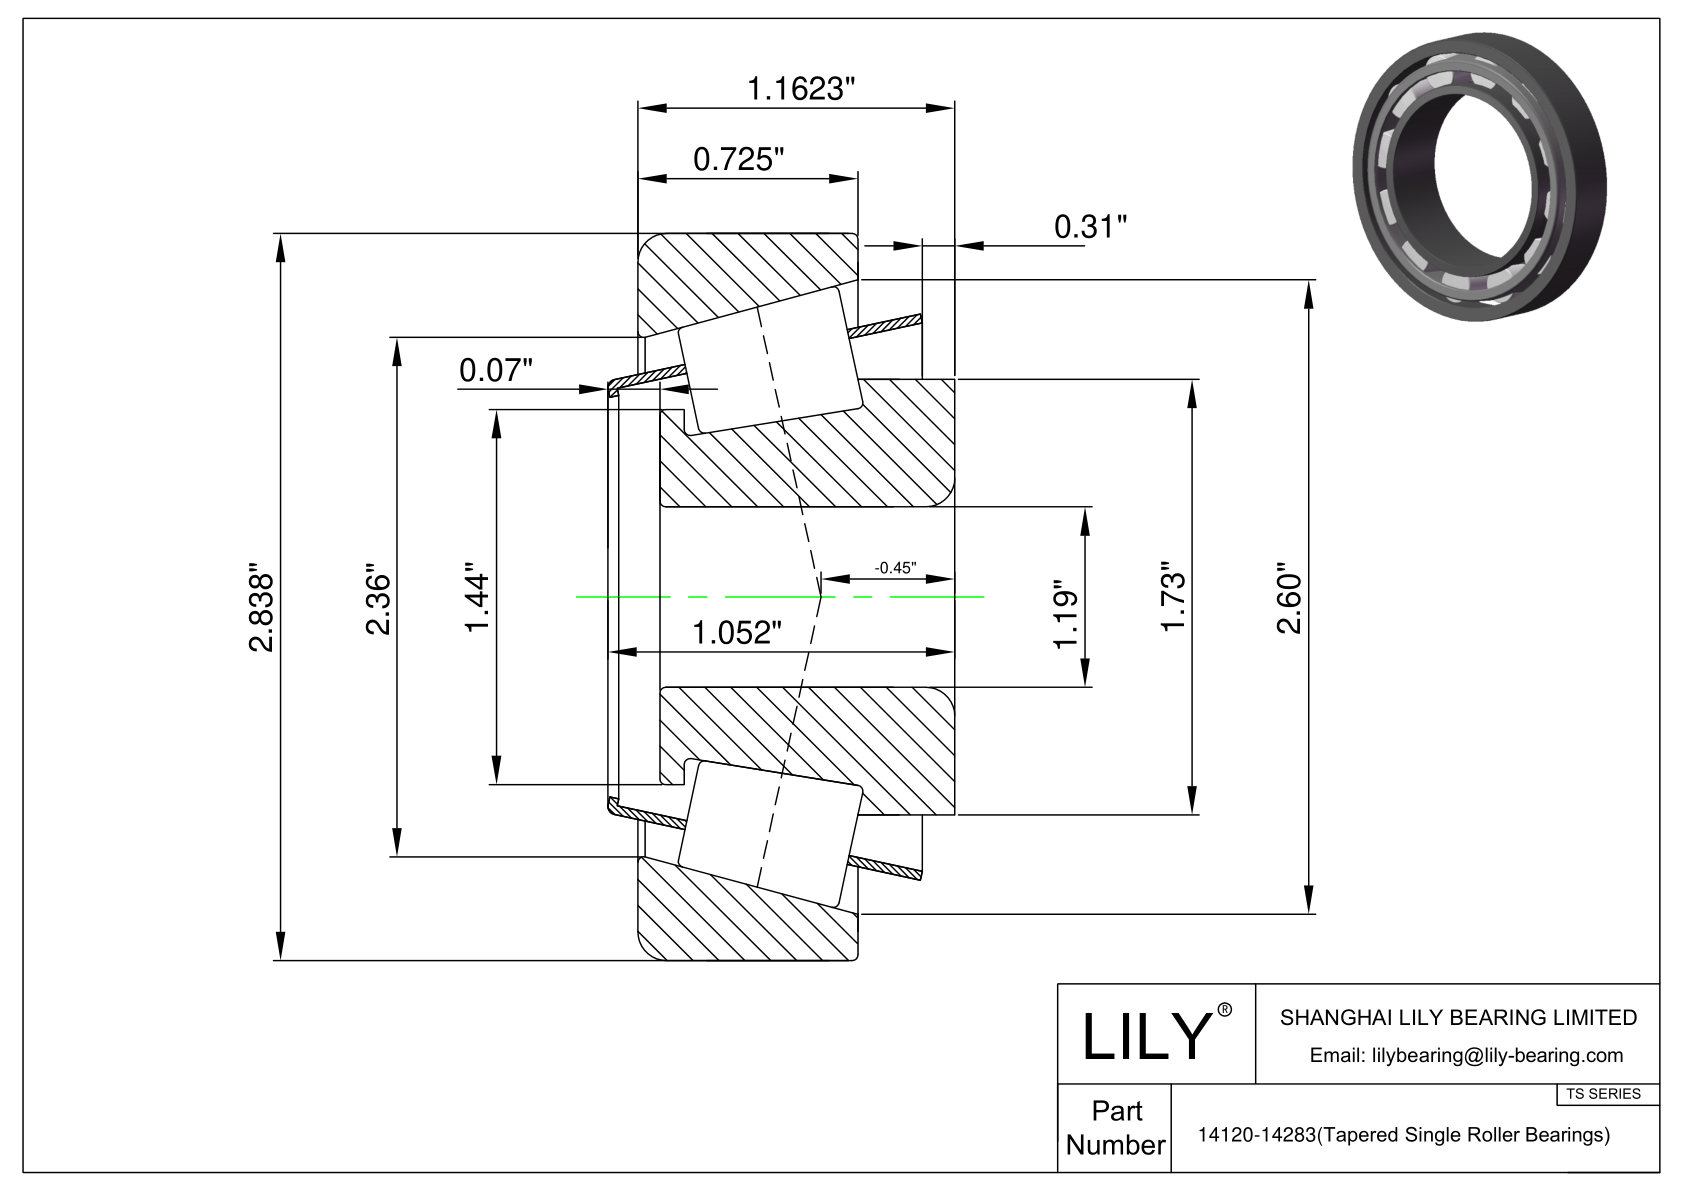 14120-14283 TS (Tapered Single Roller Bearings) (Imperial) cad drawing